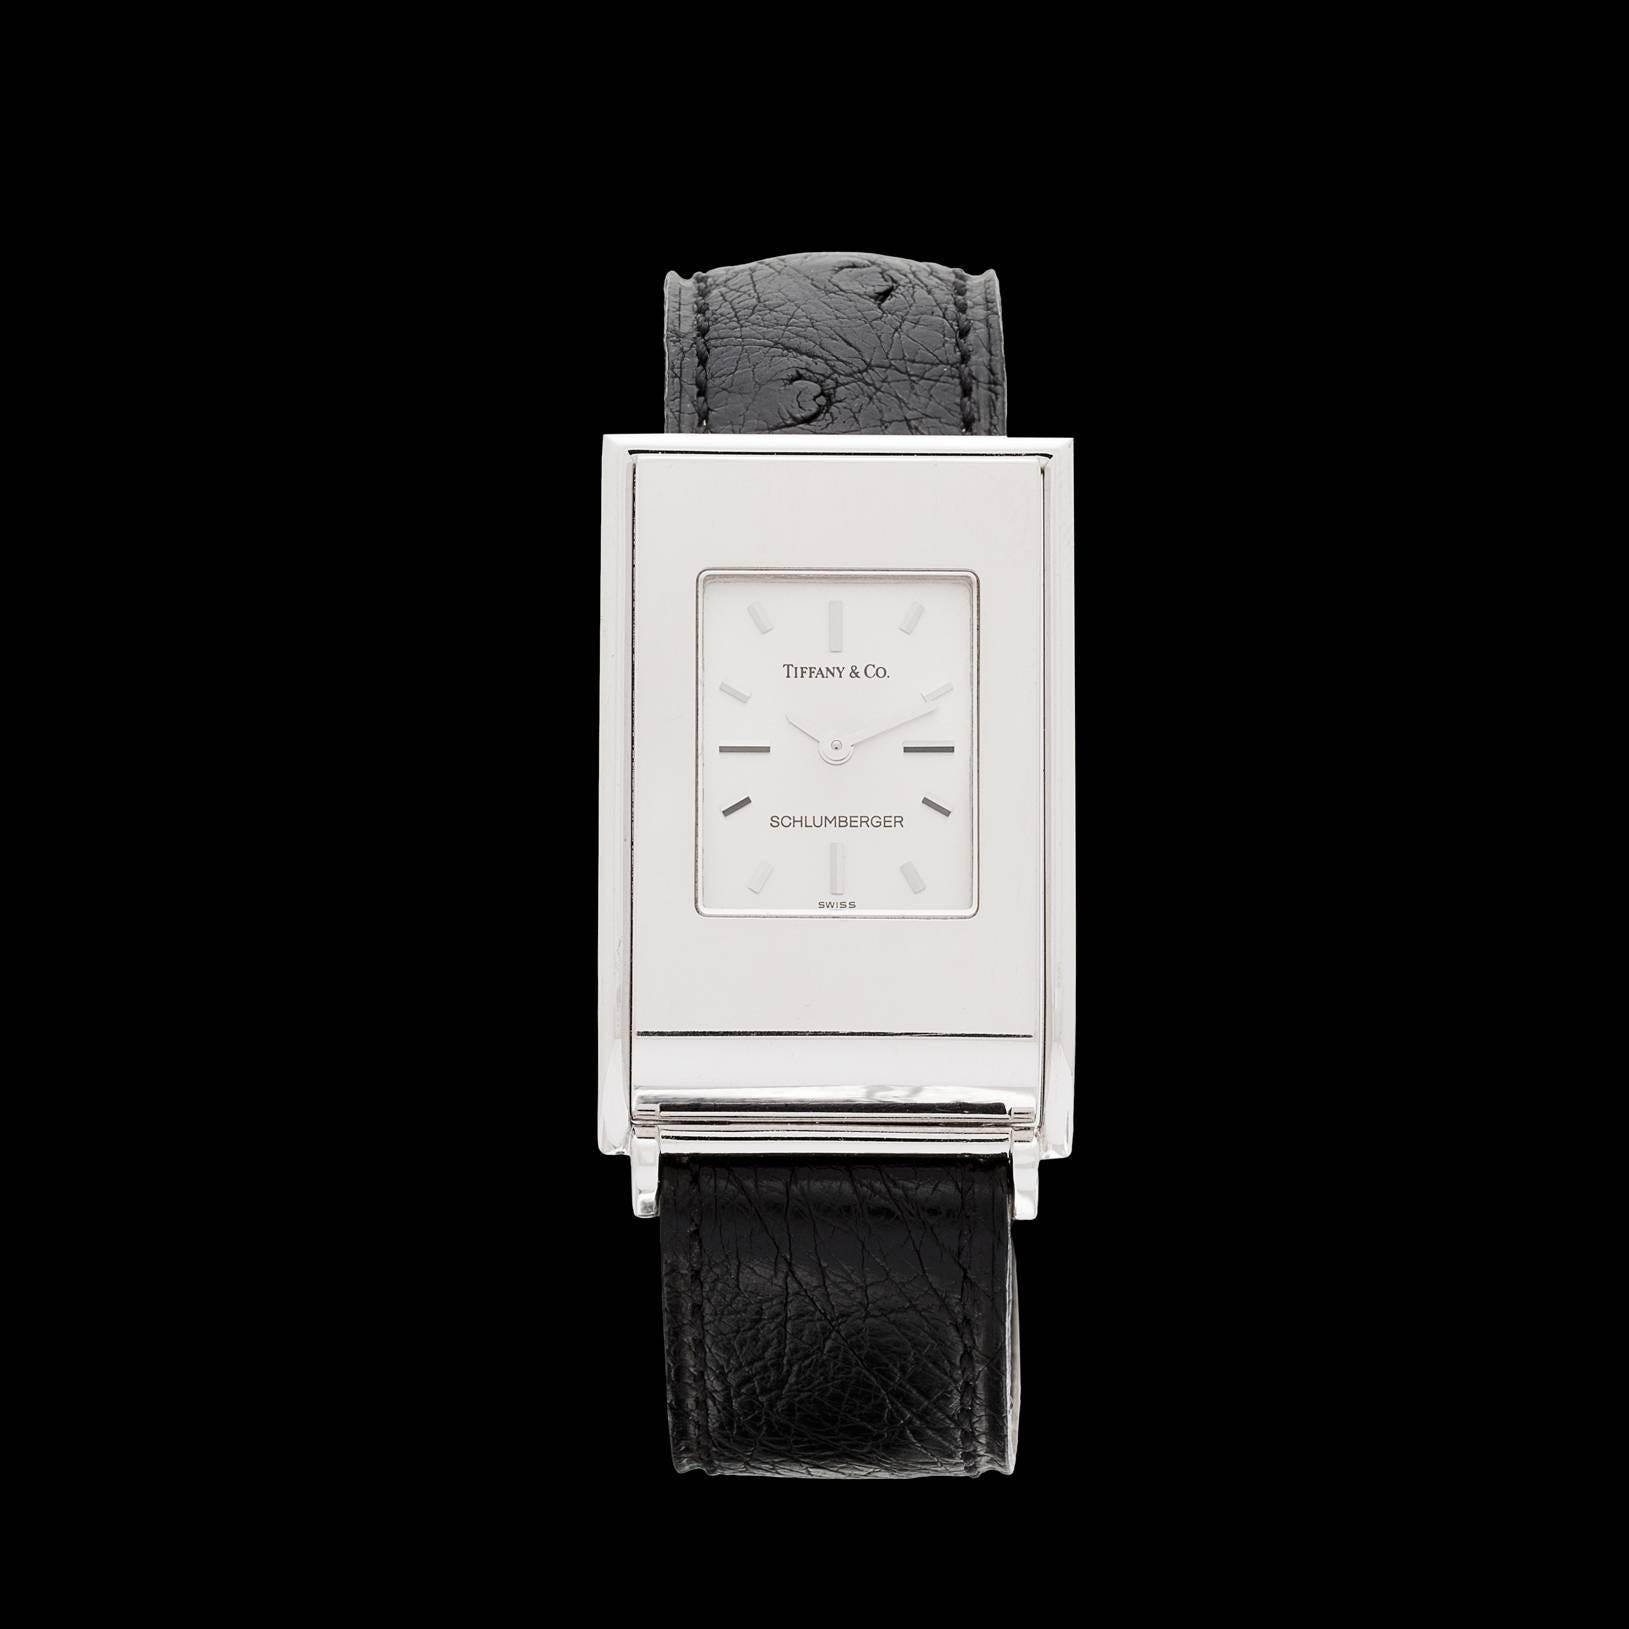 Tiffany & Co. Schlumberger ladies wristwatch features a solid 18k white gold 33.5mm by 23mm rectangular case with high polish on a Tiffany & Co. black ostrich leather bracelet. This analog watch has a Swiss made quartz movement for accurate time